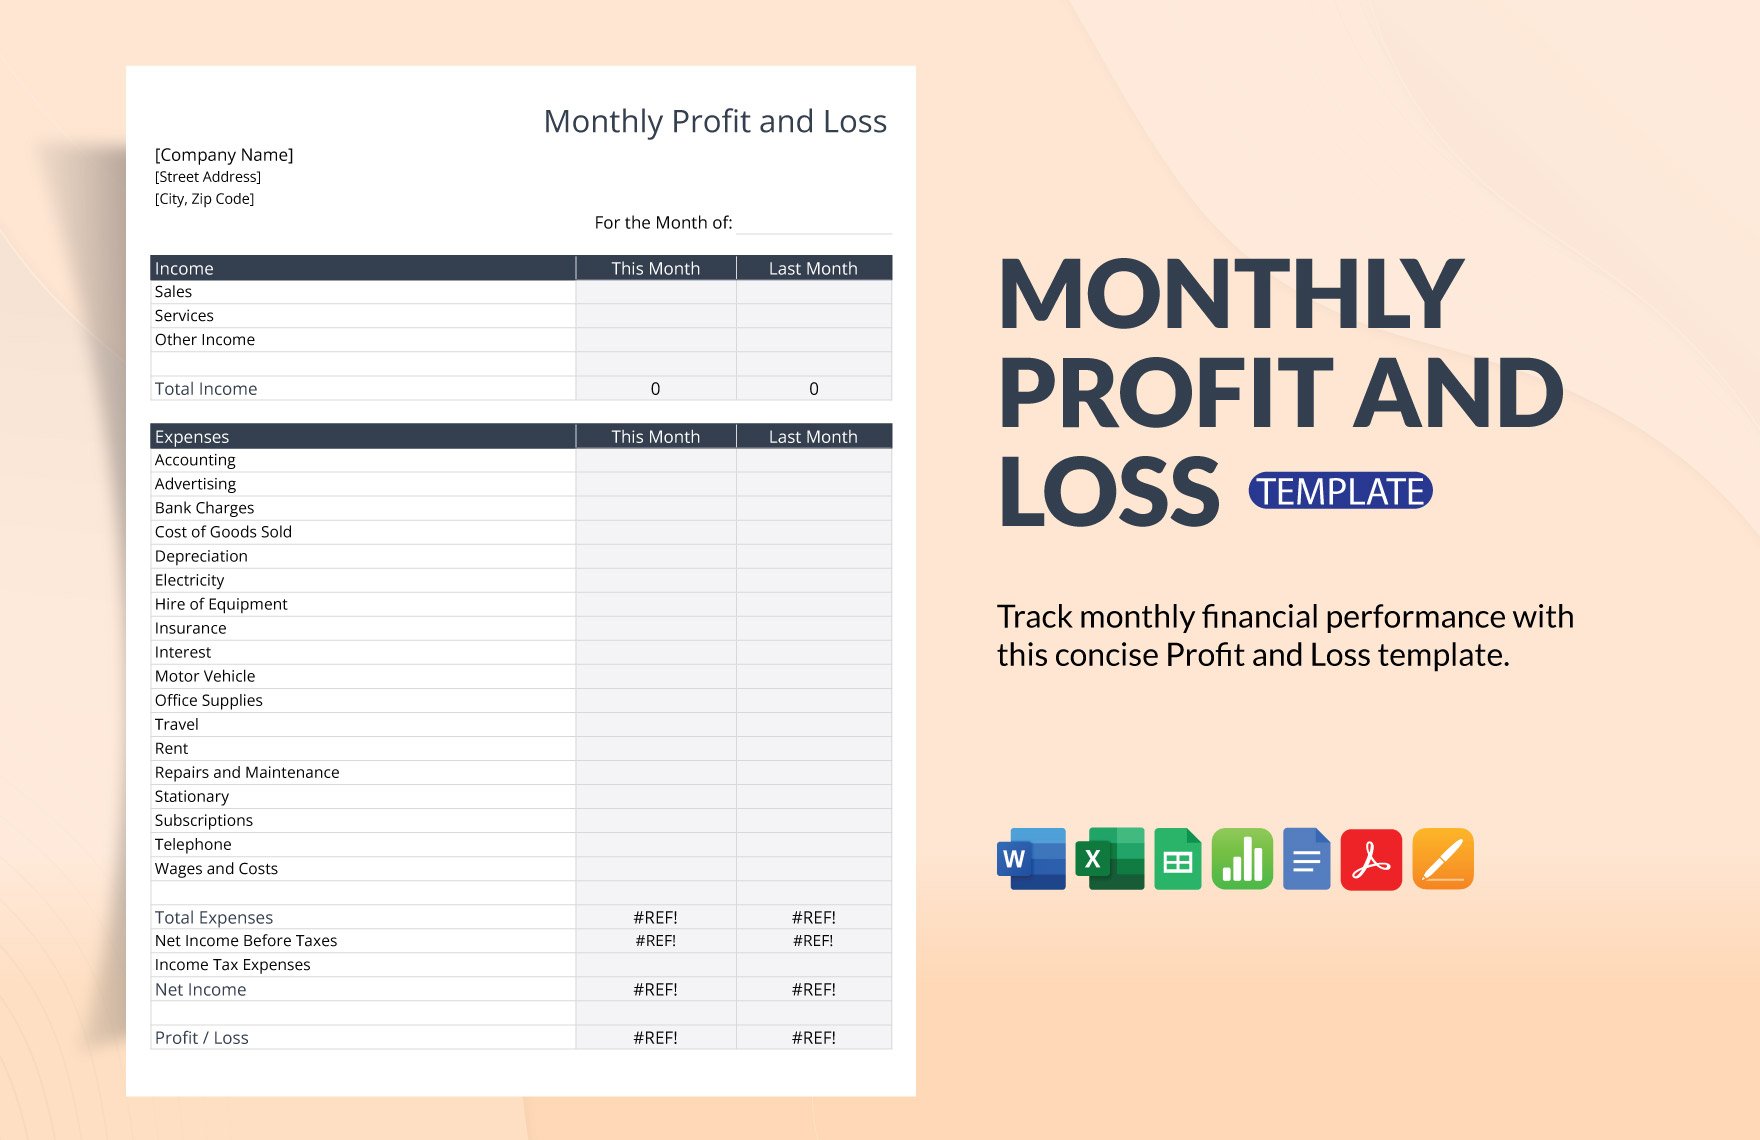 Monthly Profit and Loss Template